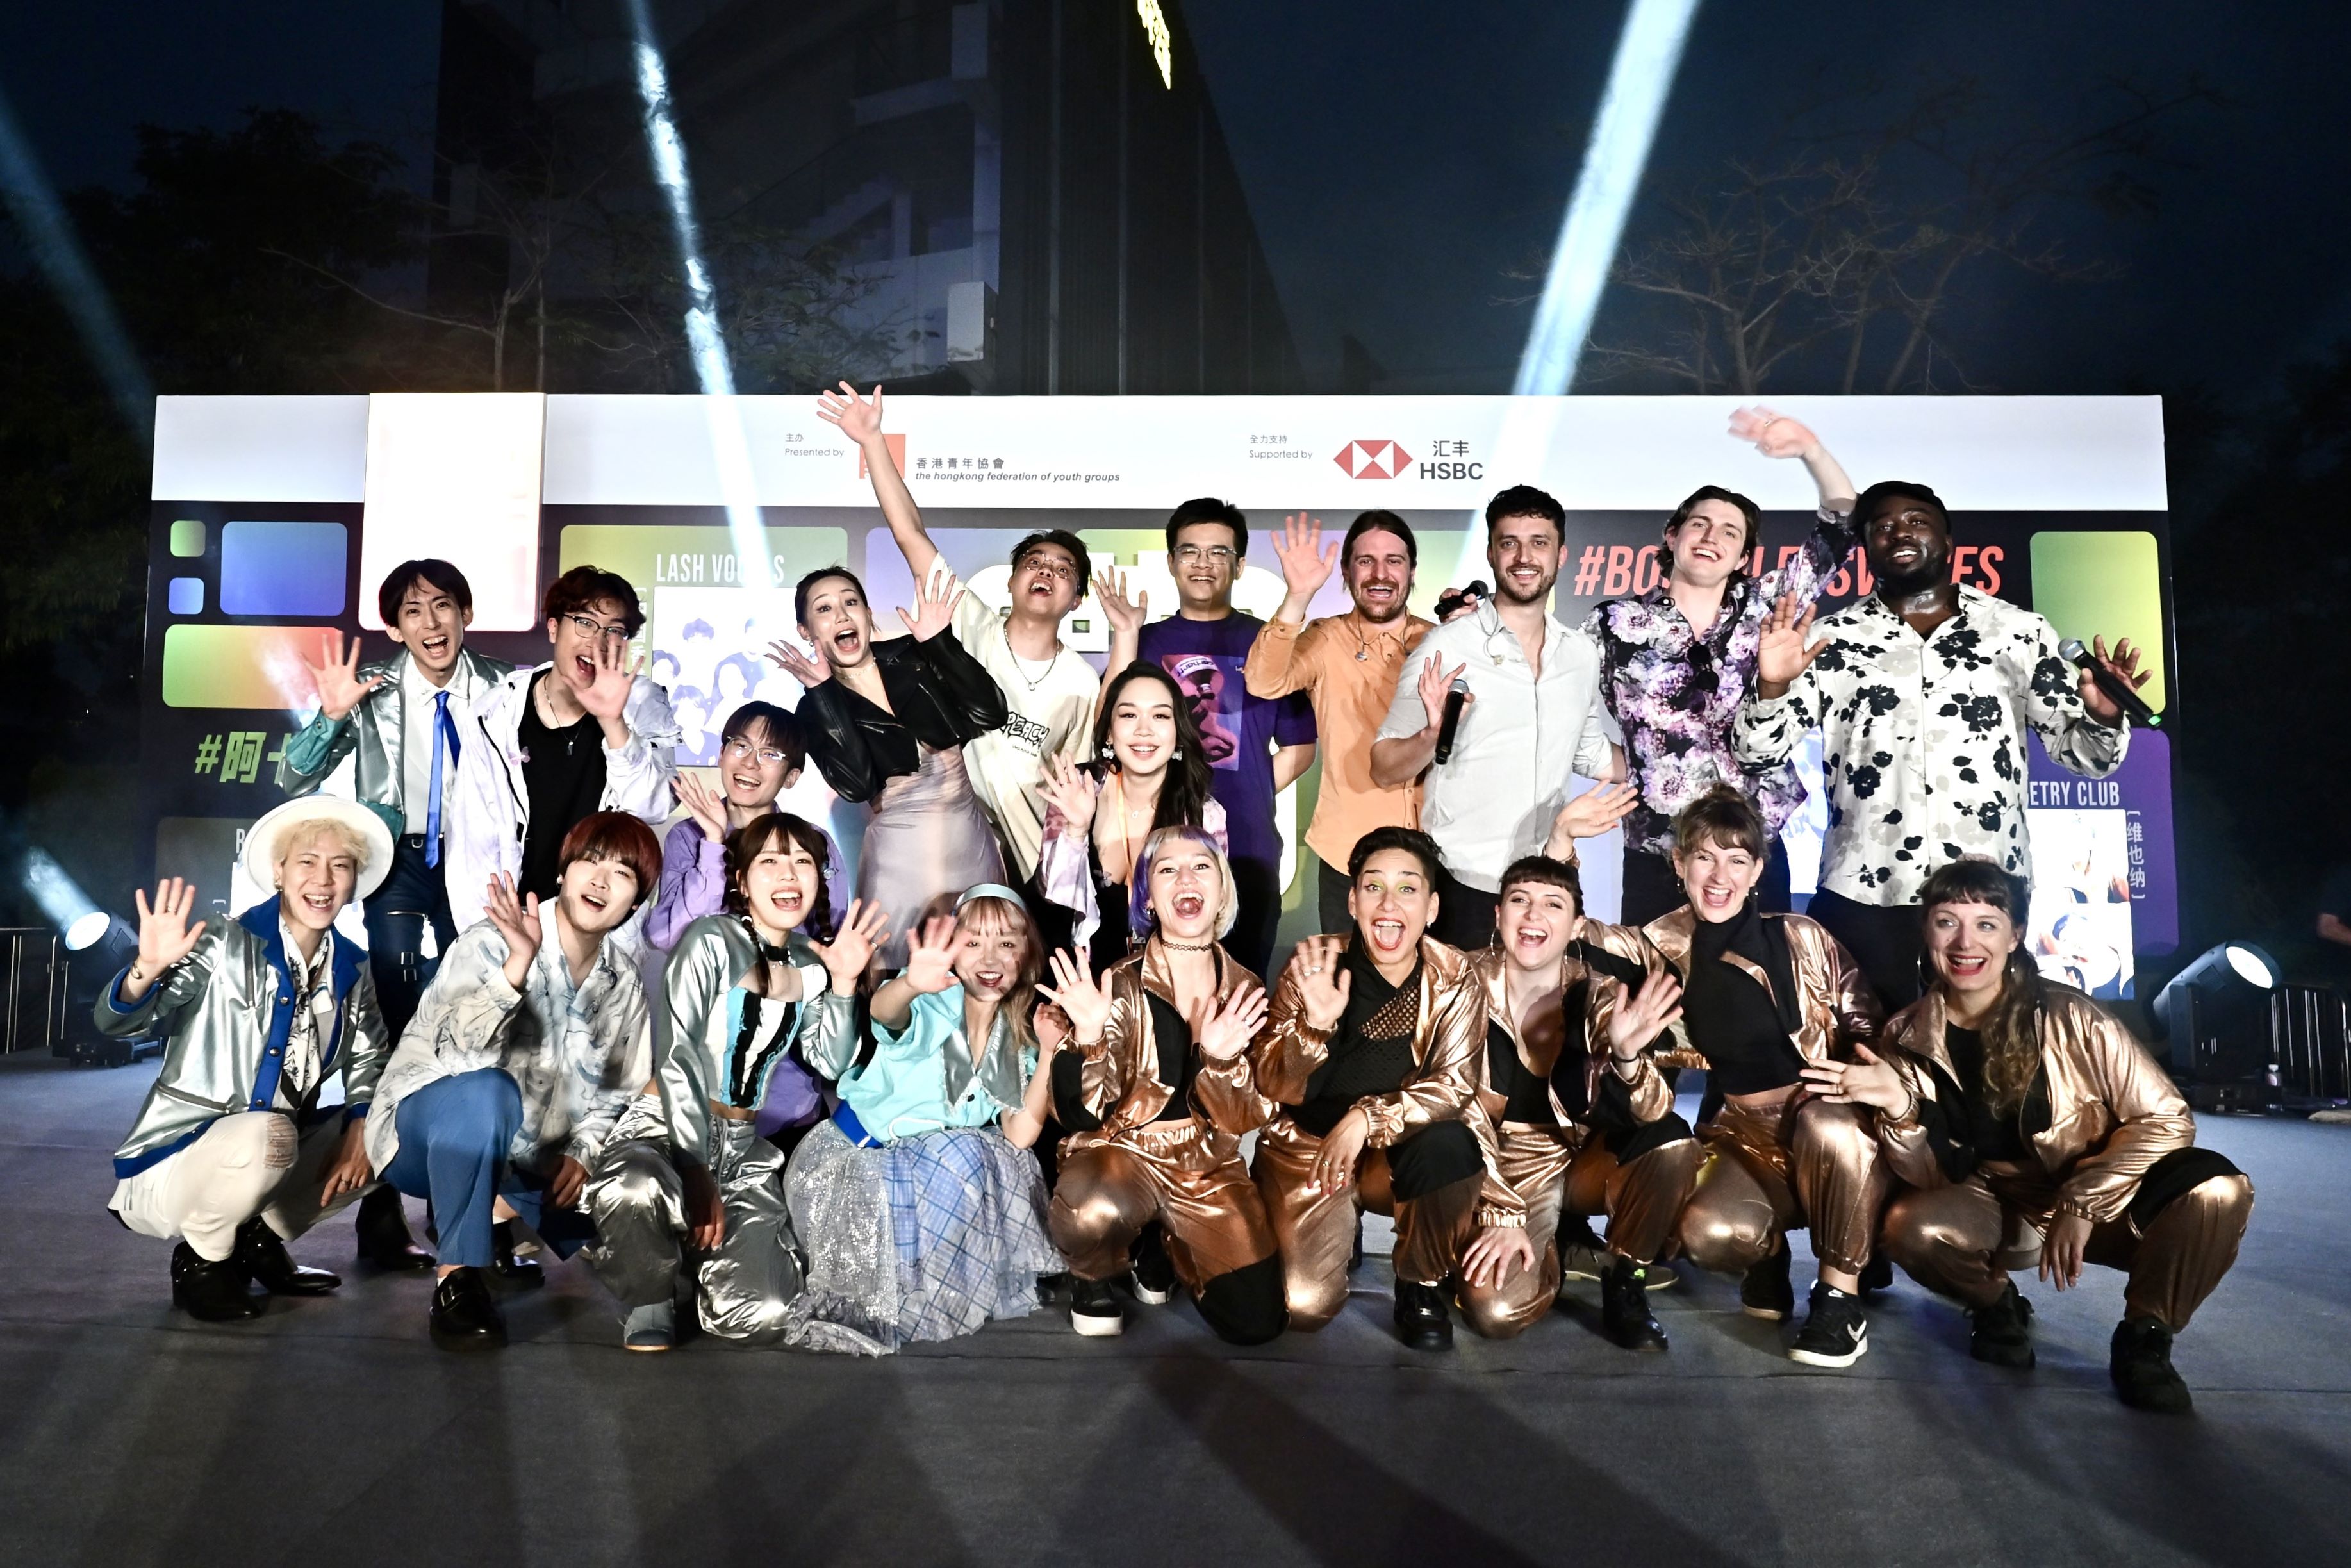 Supported by The Hongkong Bank Foundation, the Hong Kong Federation of Youth Groups organised an exciting musical extravaganza 